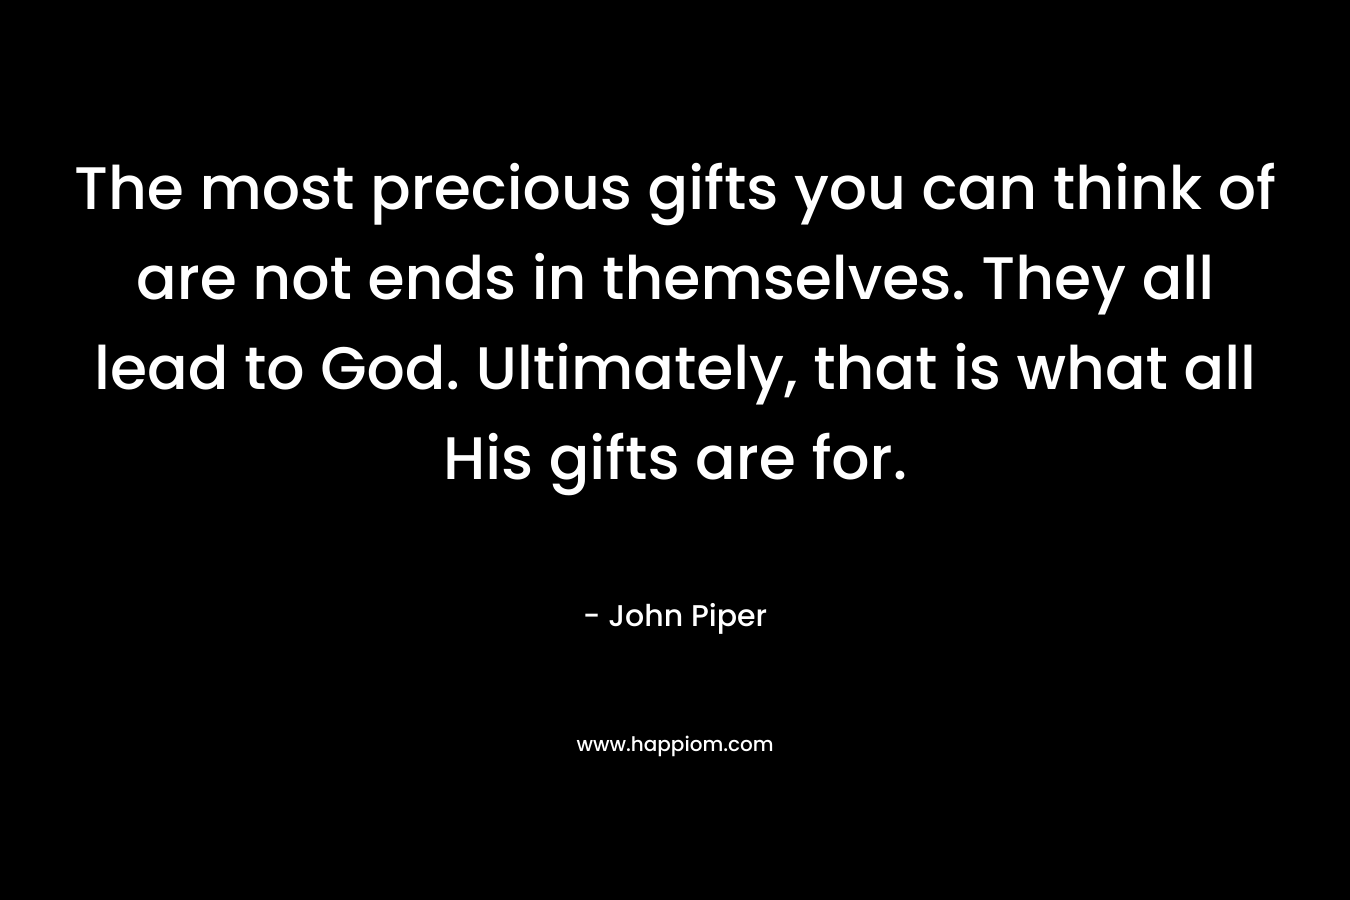 The most precious gifts you can think of are not ends in themselves. They all lead to God. Ultimately, that is what all His gifts are for.